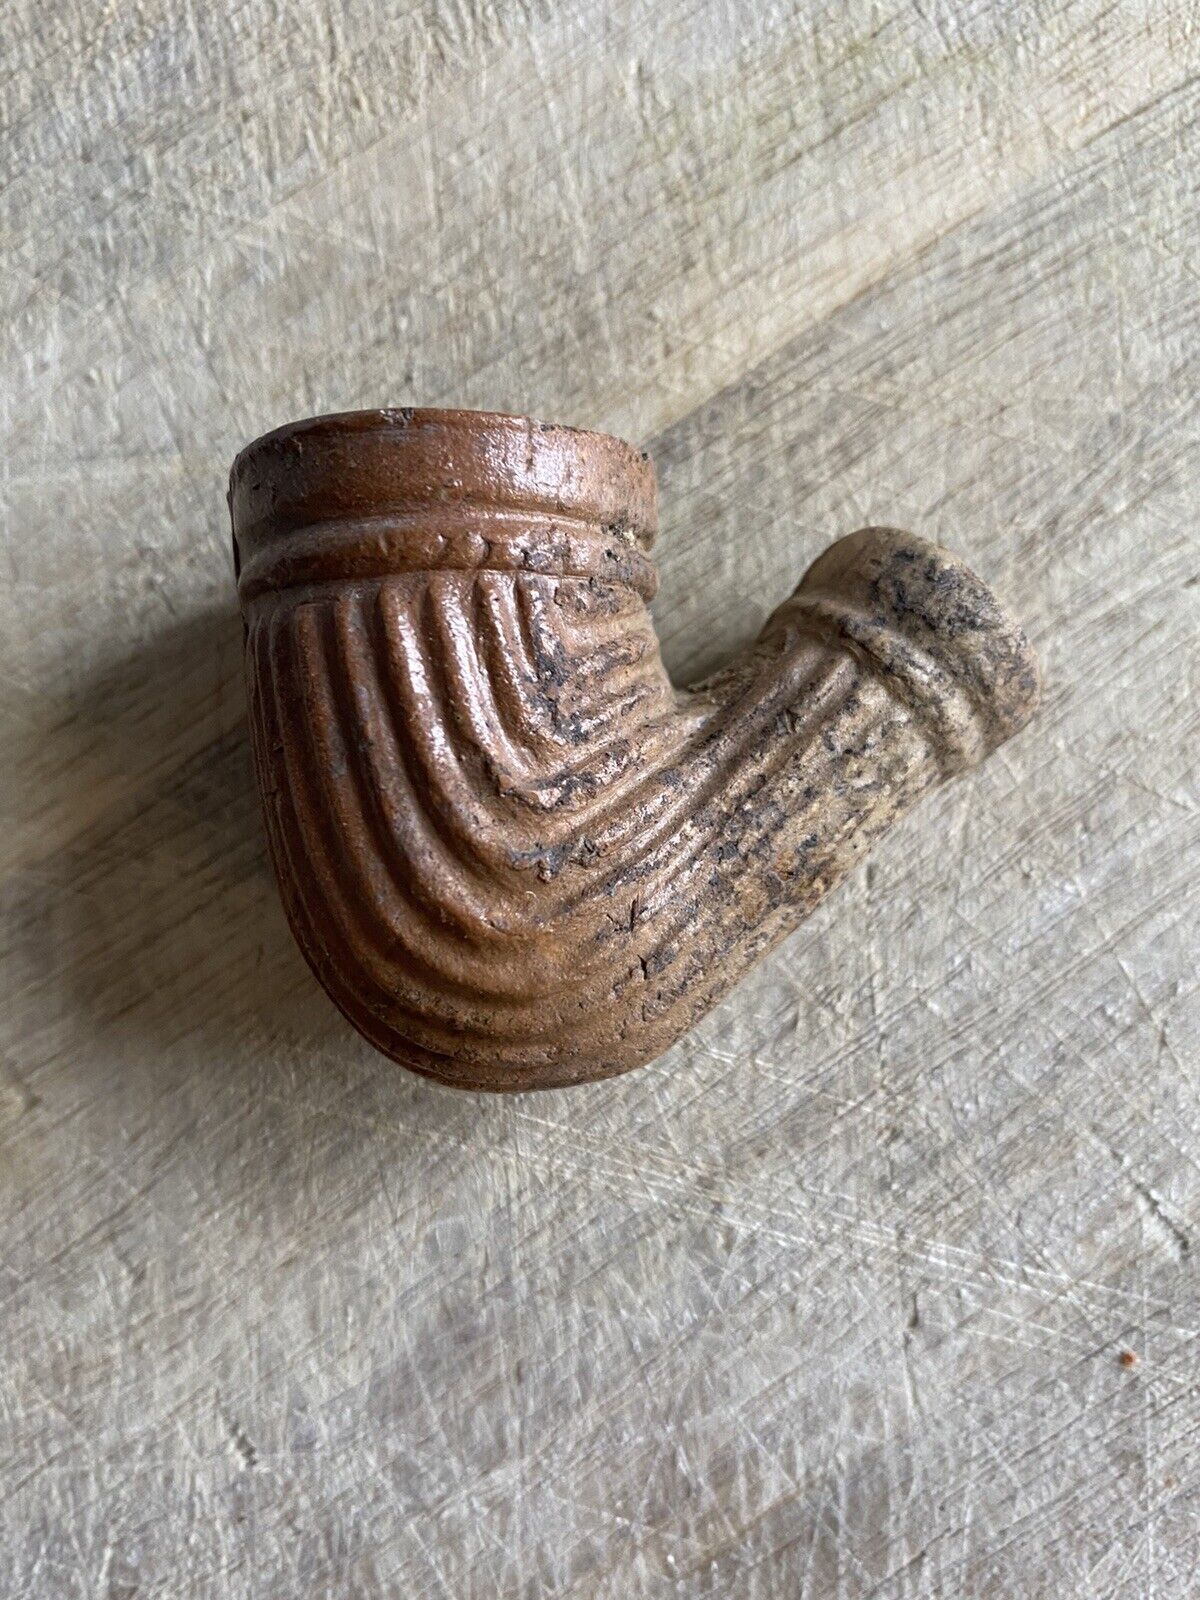 EARLY 1800’s Clay Trade Pipe